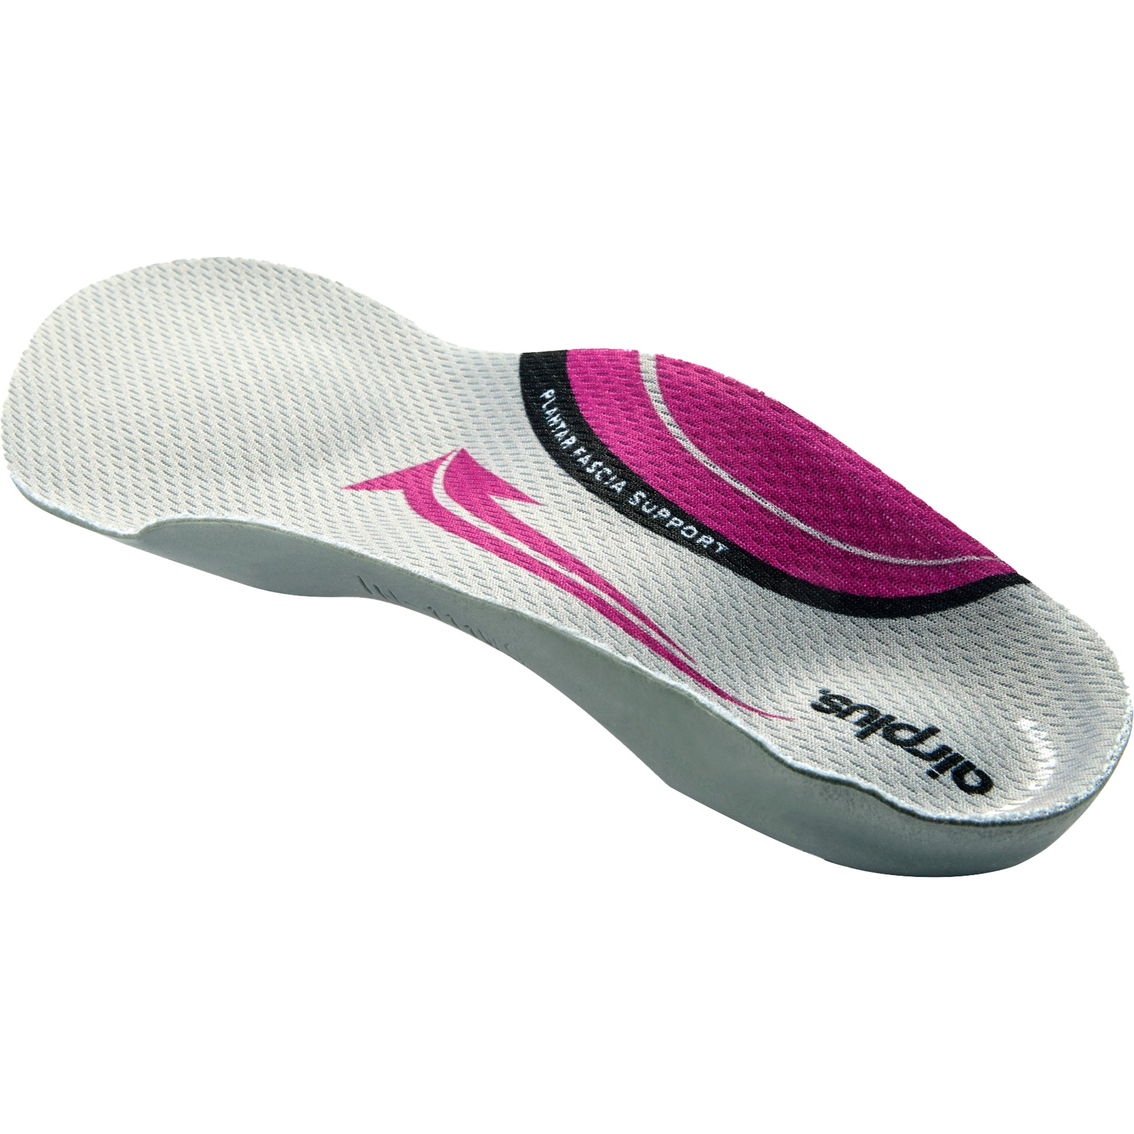 Airplus Plantar Fascia Orthotic Insole for Women, Size 5 to 11 - Image 4 of 7